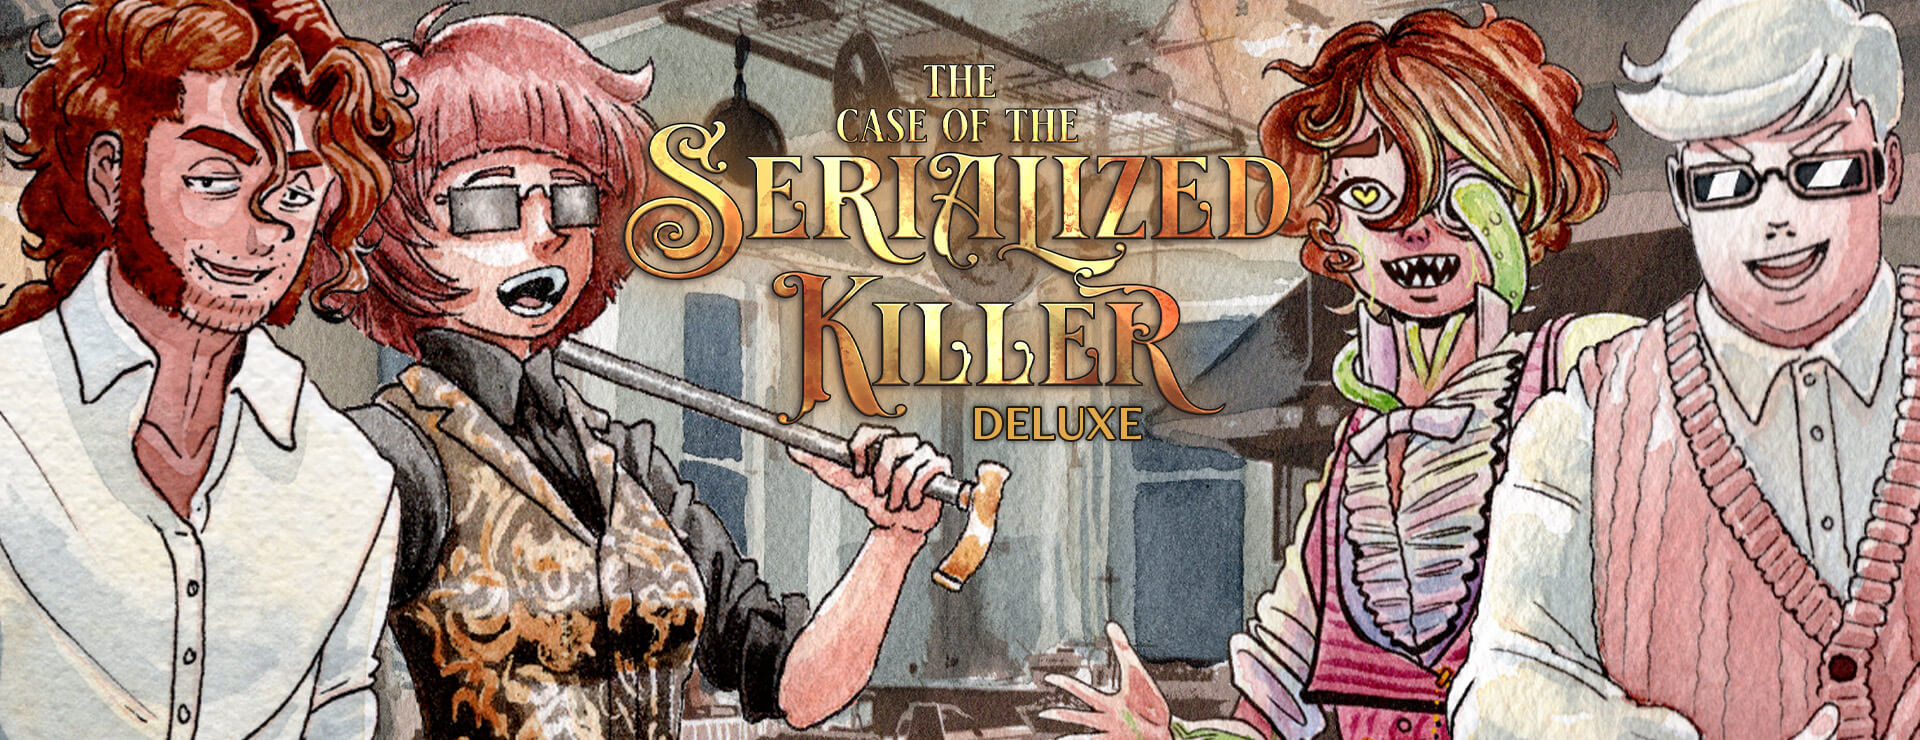 The Case of the Serialized Killer Deluxe - Visual Novel Game